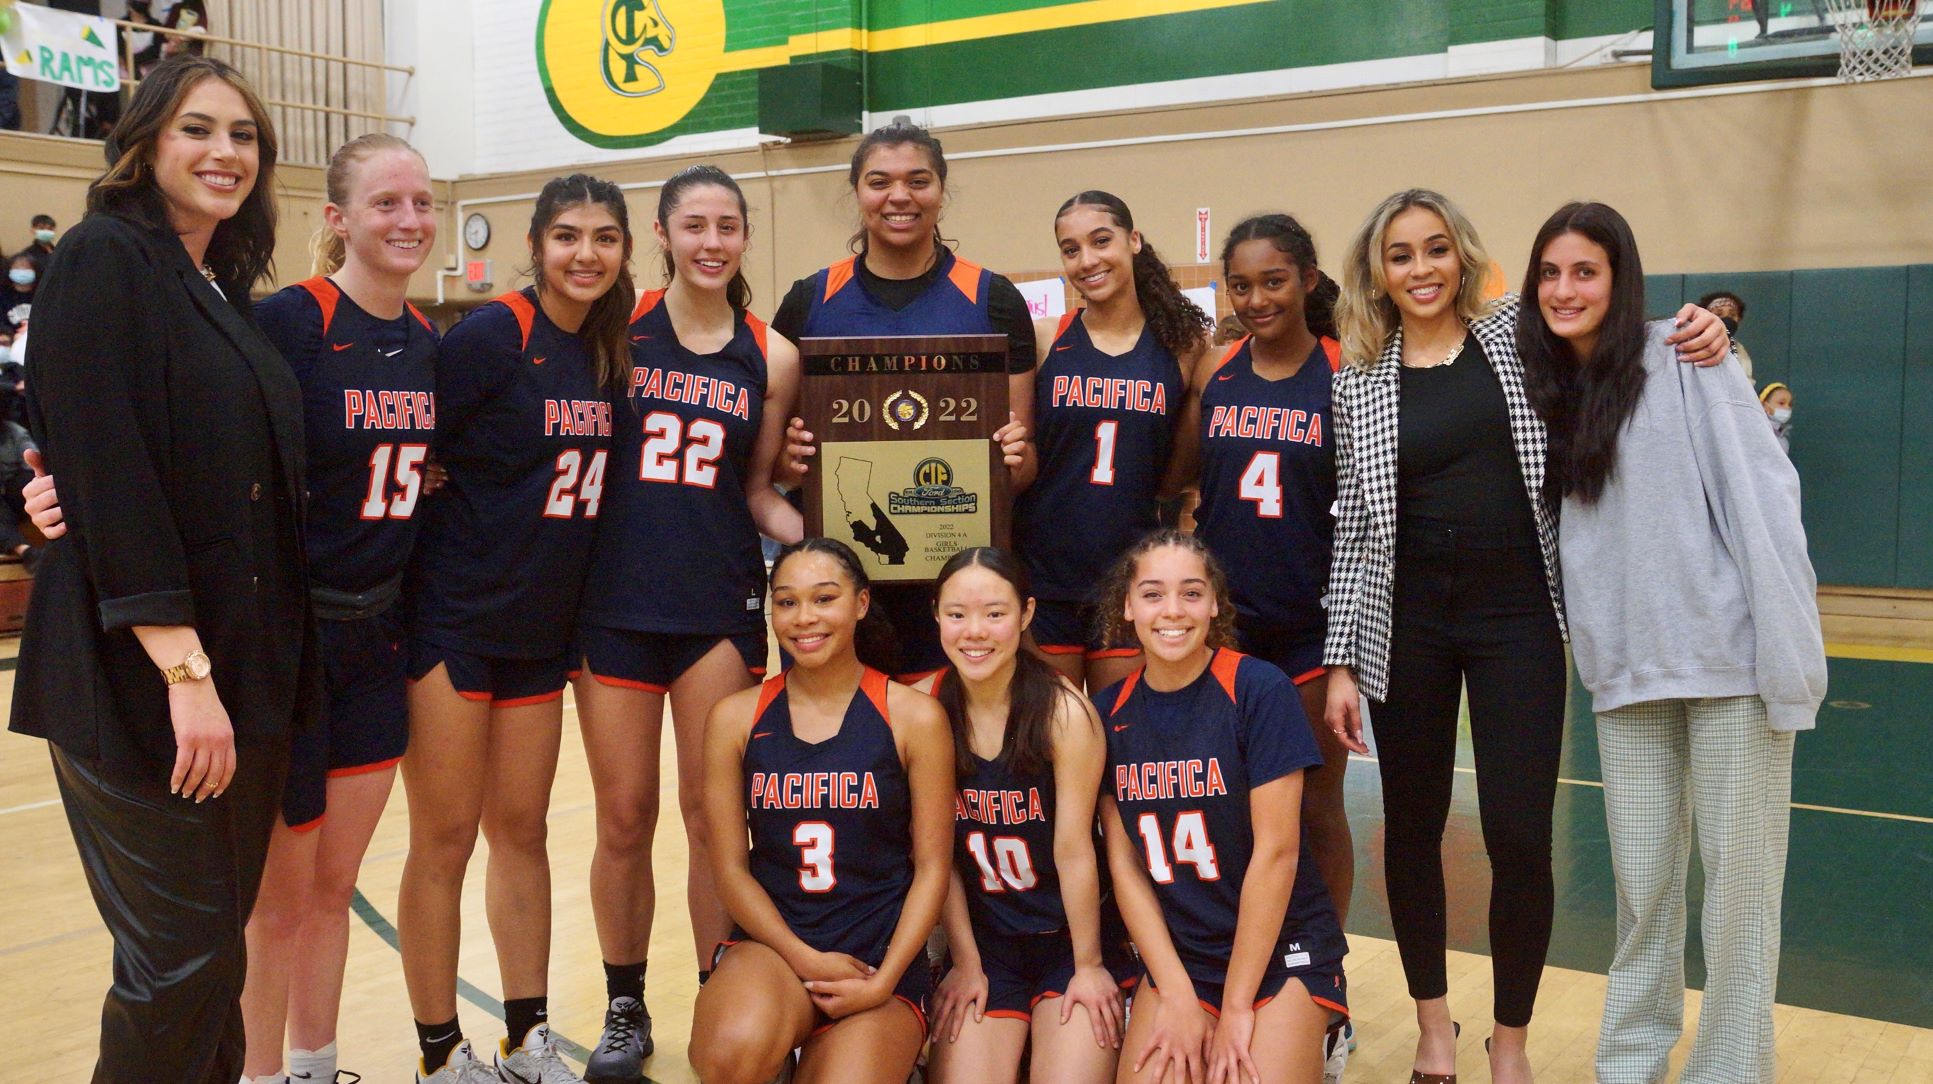 After winning first CIF title, Pacifica Christian moves on to state